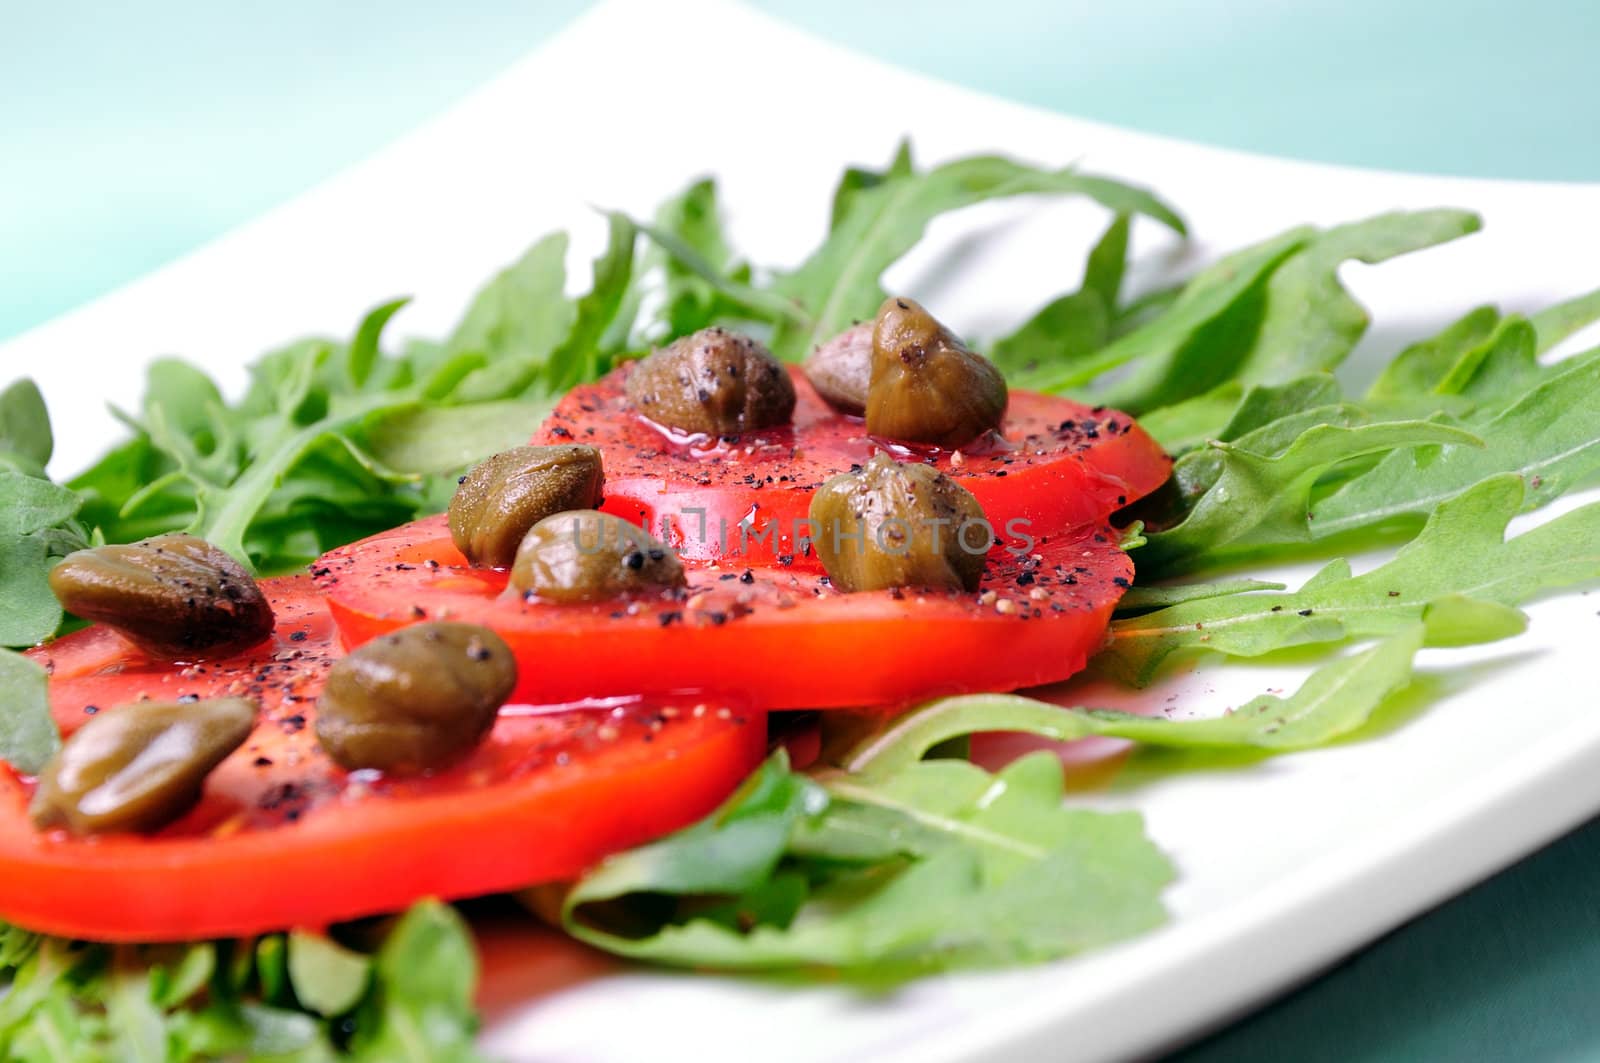 Salad with fresh tomatoes, capers and arugula by Apolonia